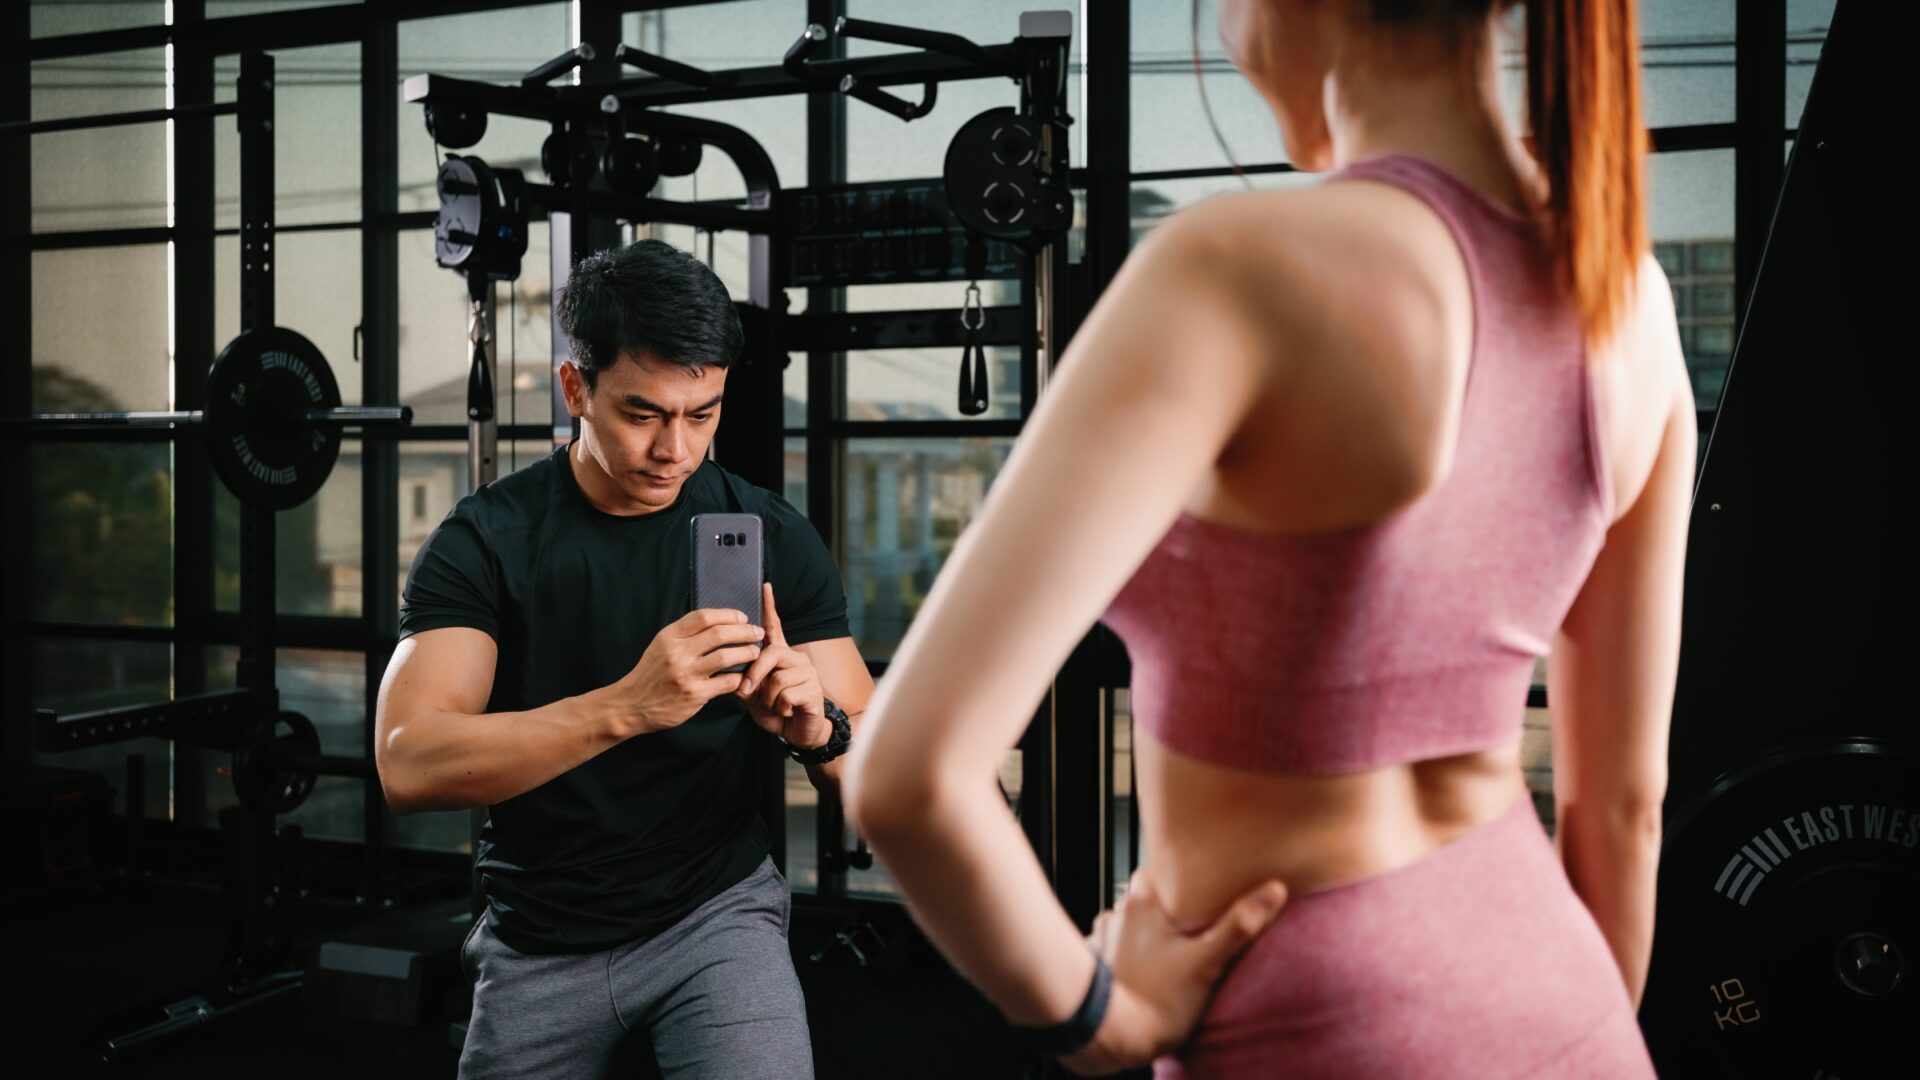 Man taking a photo with his phone of a female fitness influencer at the gym.